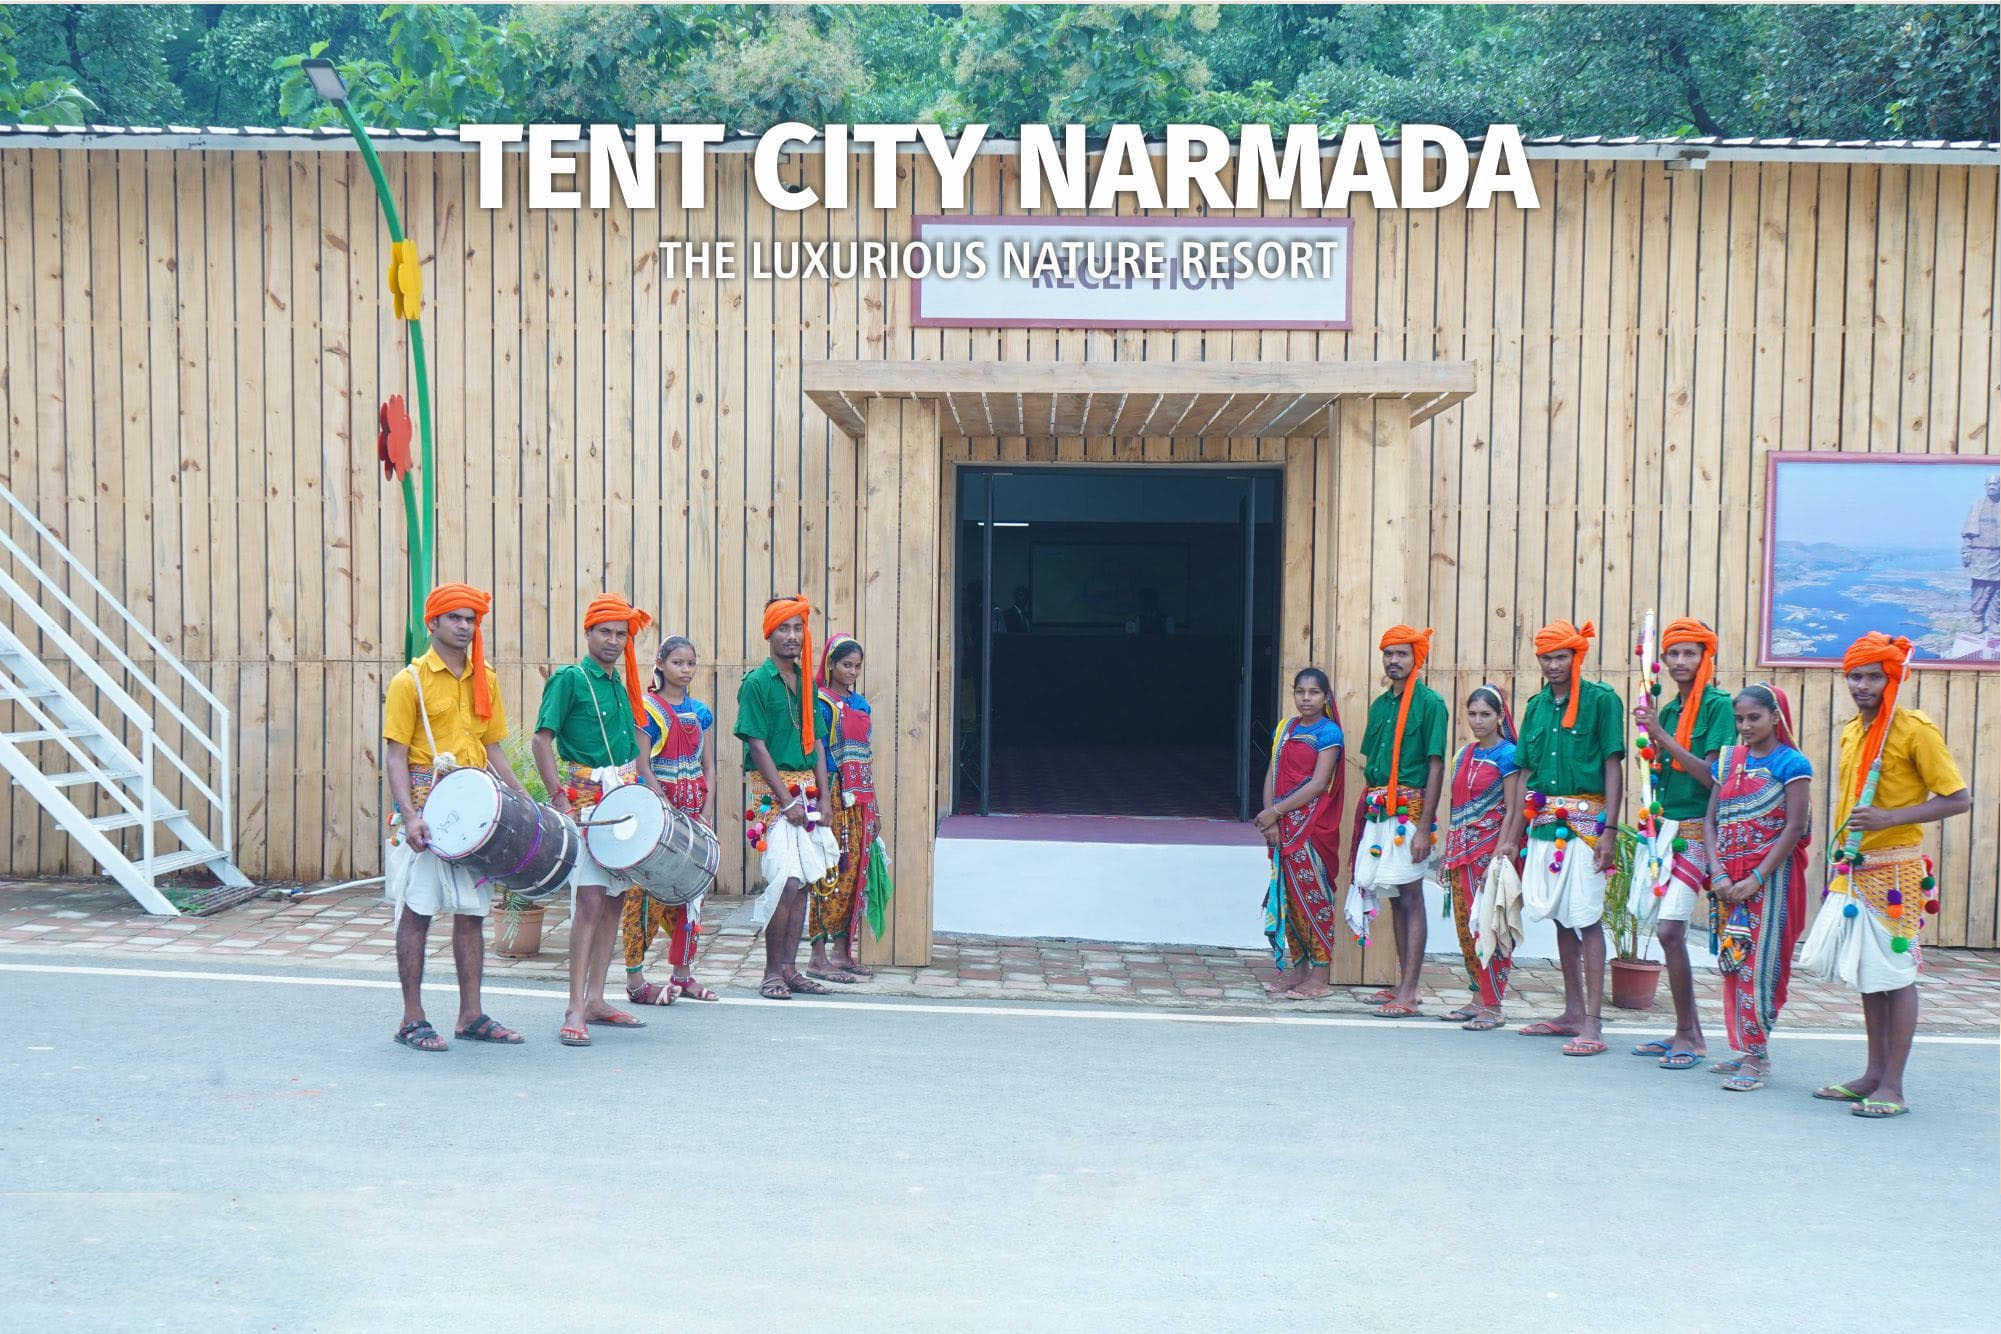 <span  class="uc_style_uc_tiles_grid_image_elementor_uc_items_attribute_title" style="color:#ffffff;">Tent City Narmada Luxurious Resort Image</span>